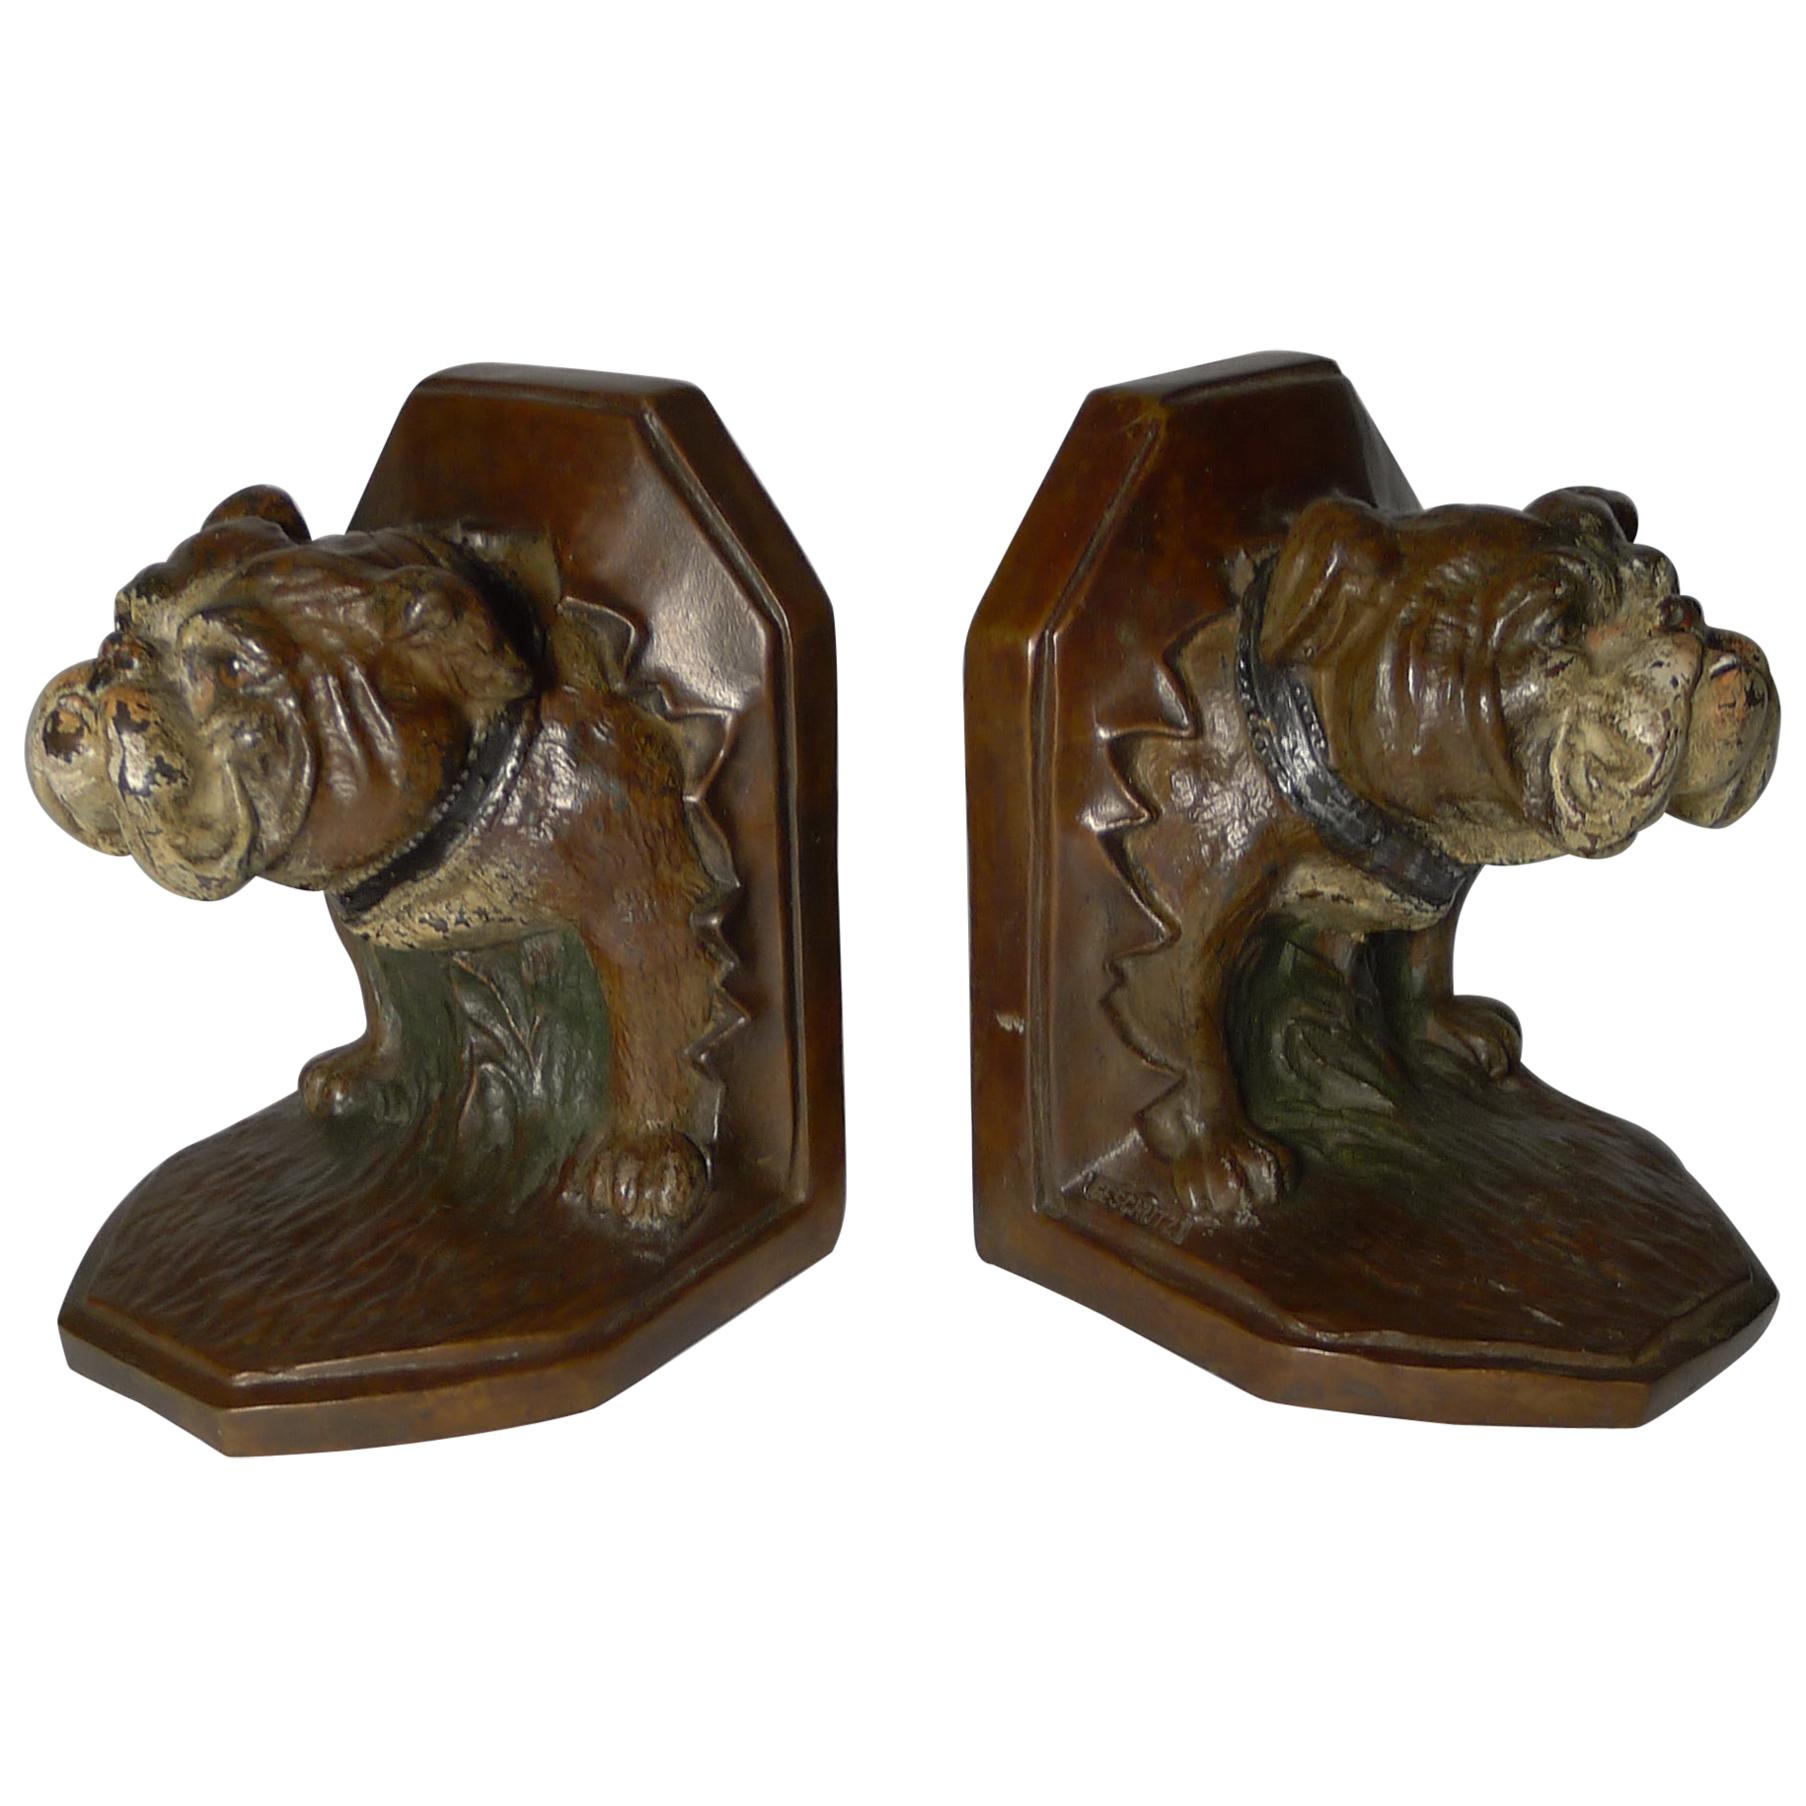 Pair of Antique Cold Painted Bronze Bookends, Bulldog, circa 1900